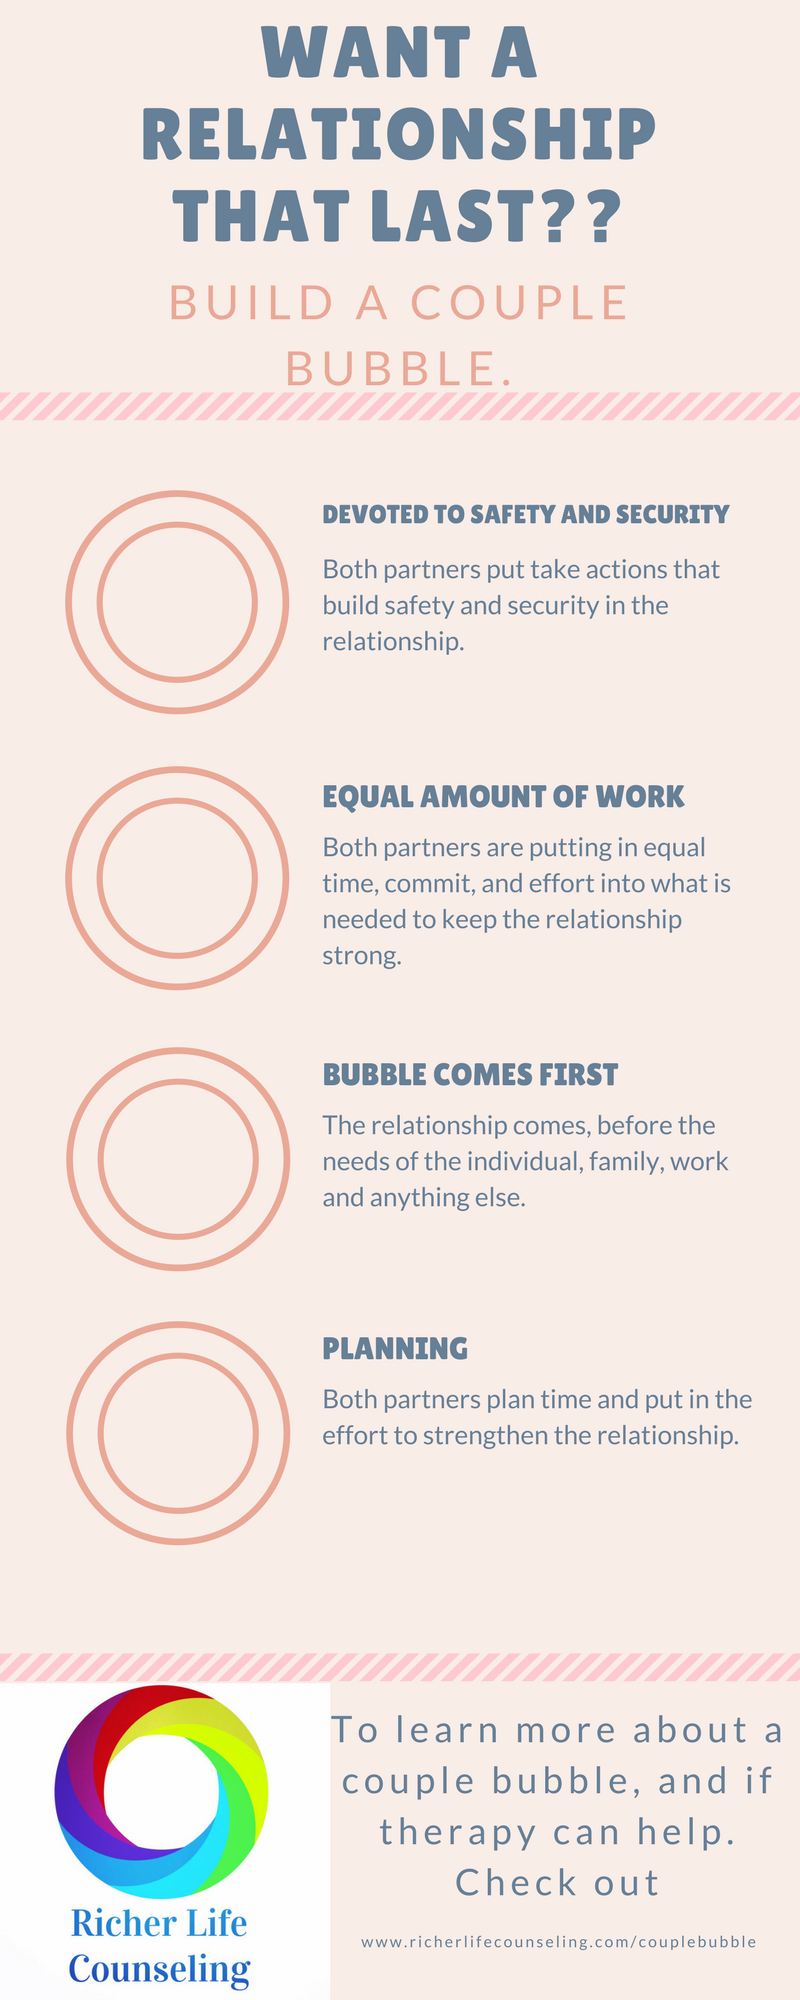 8 Tips to Create a Couple Bubble in Your Relationship